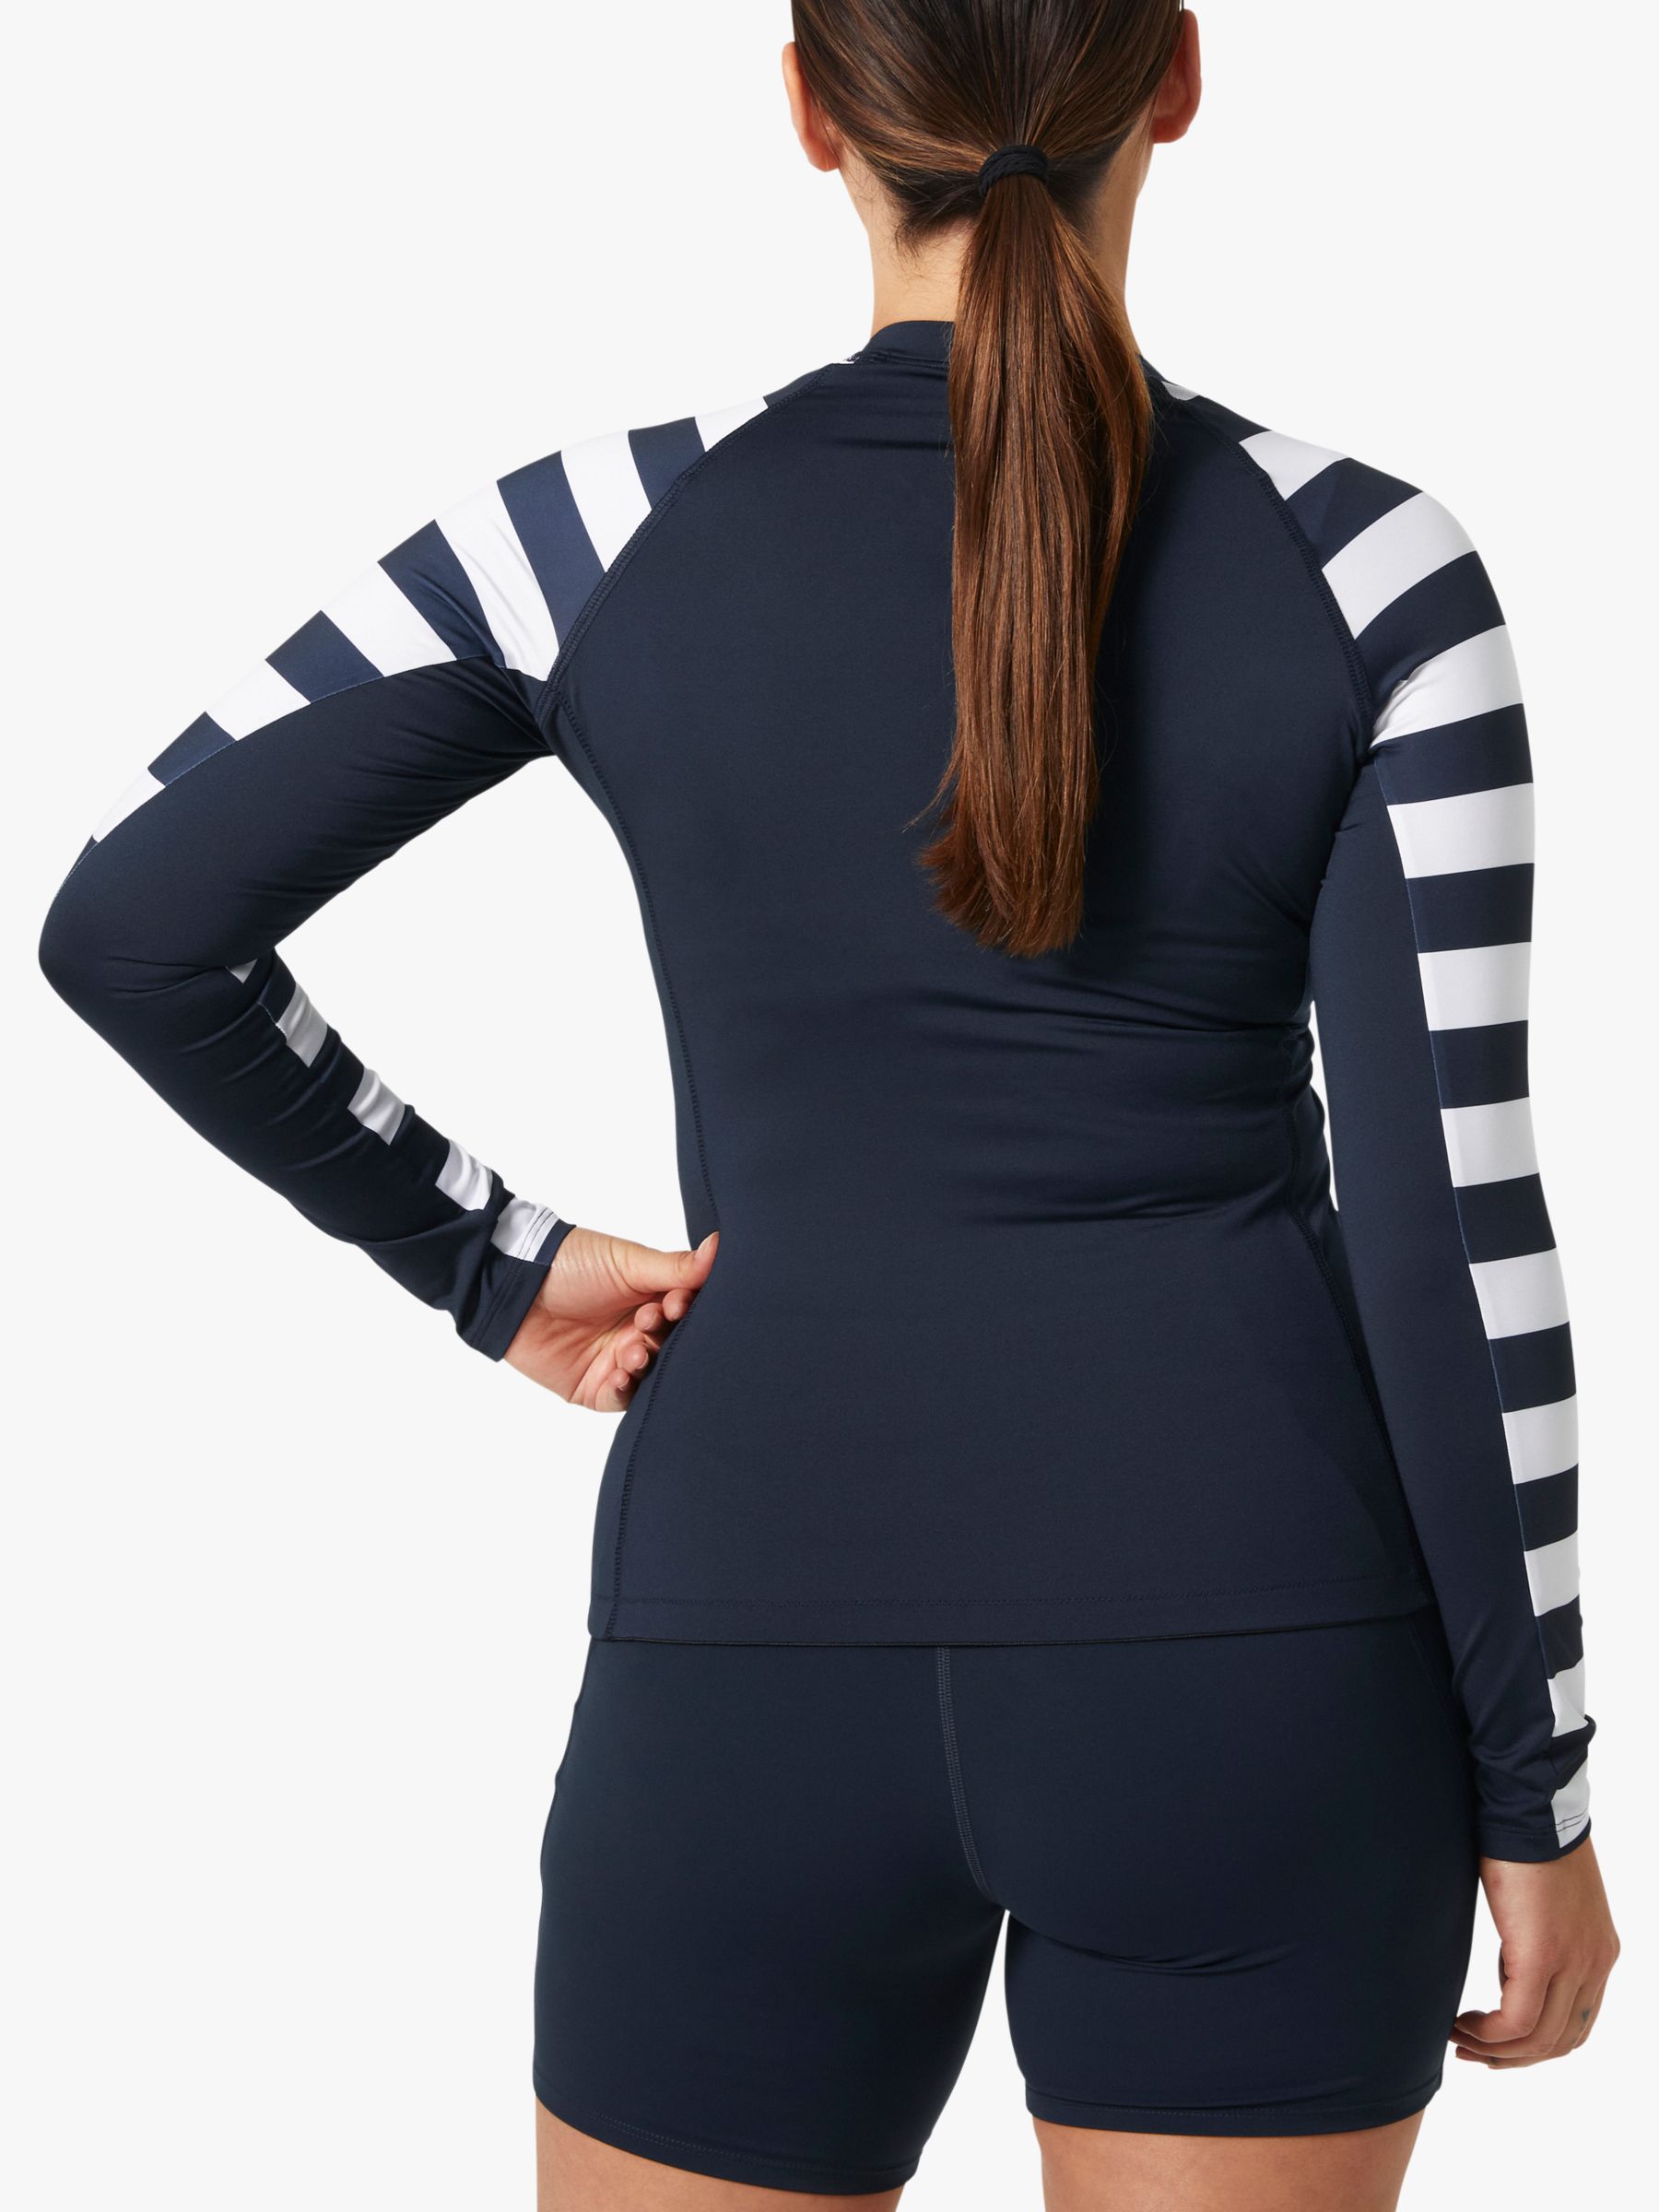 Buy Helly Hansen UPF 50+ Recycled Striped Swim Top, Navy/White Online at johnlewis.com